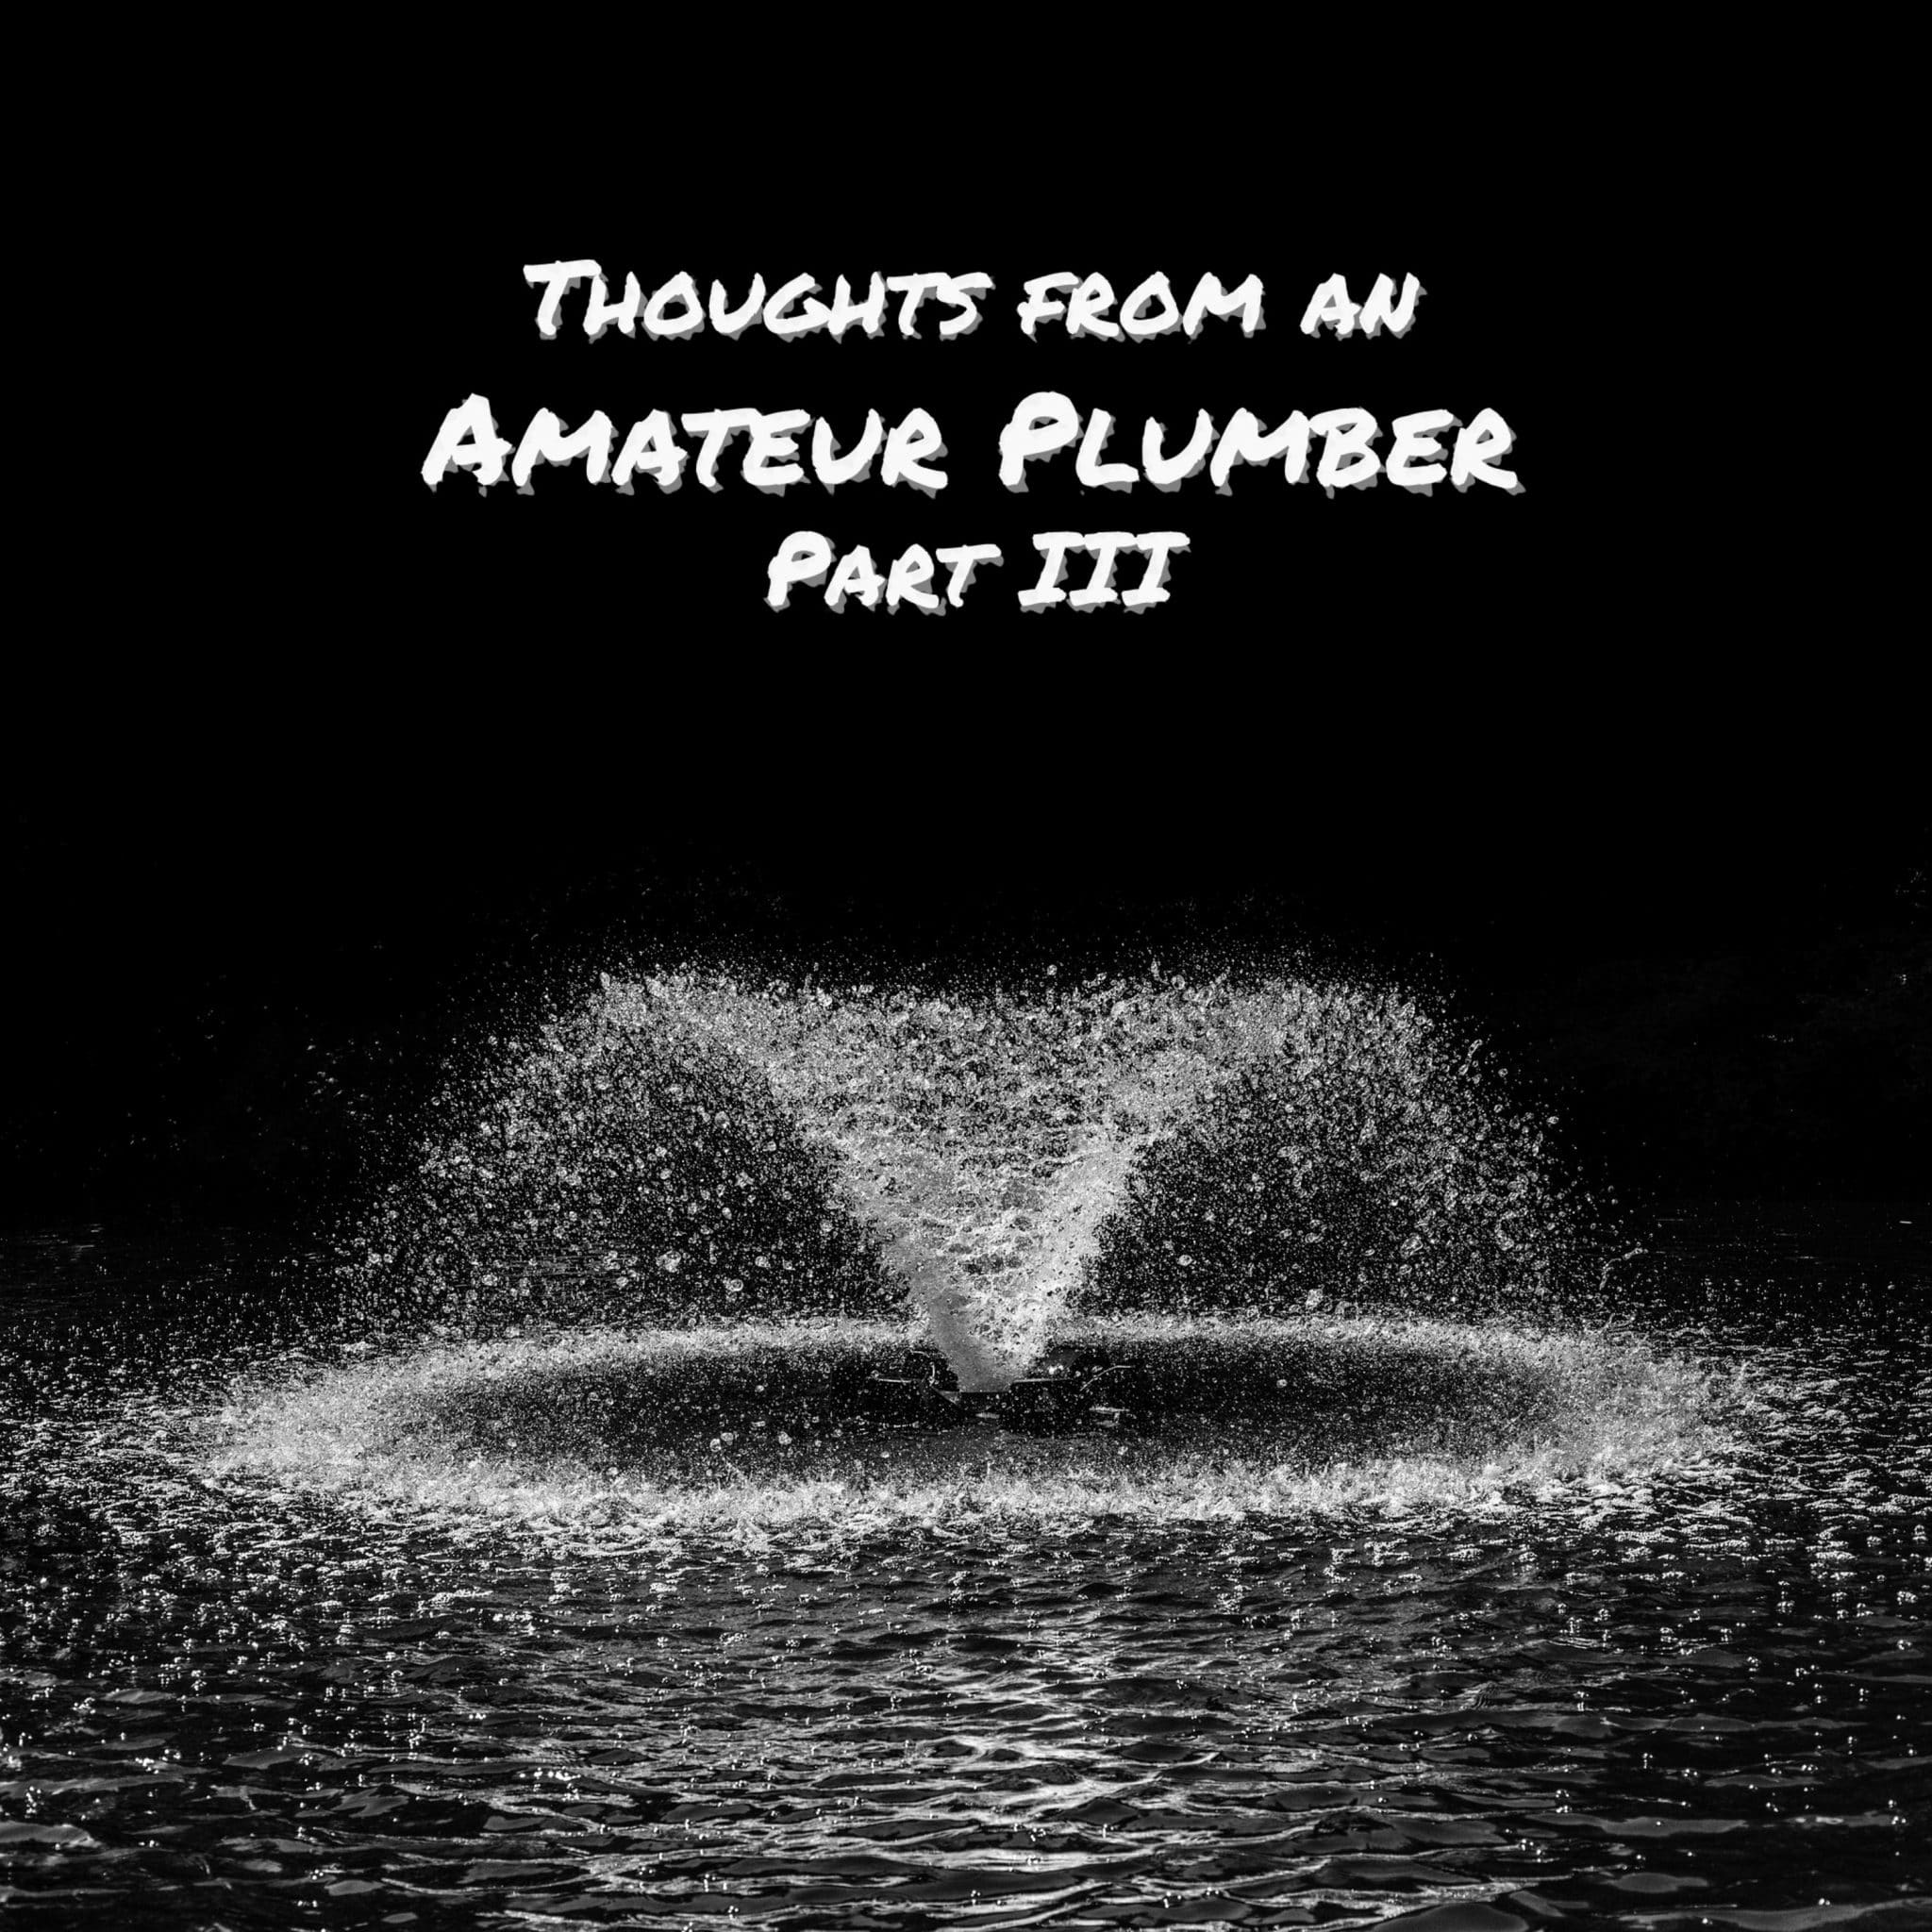 Thoughts From an Amateur Plumber III: The Last Crusade